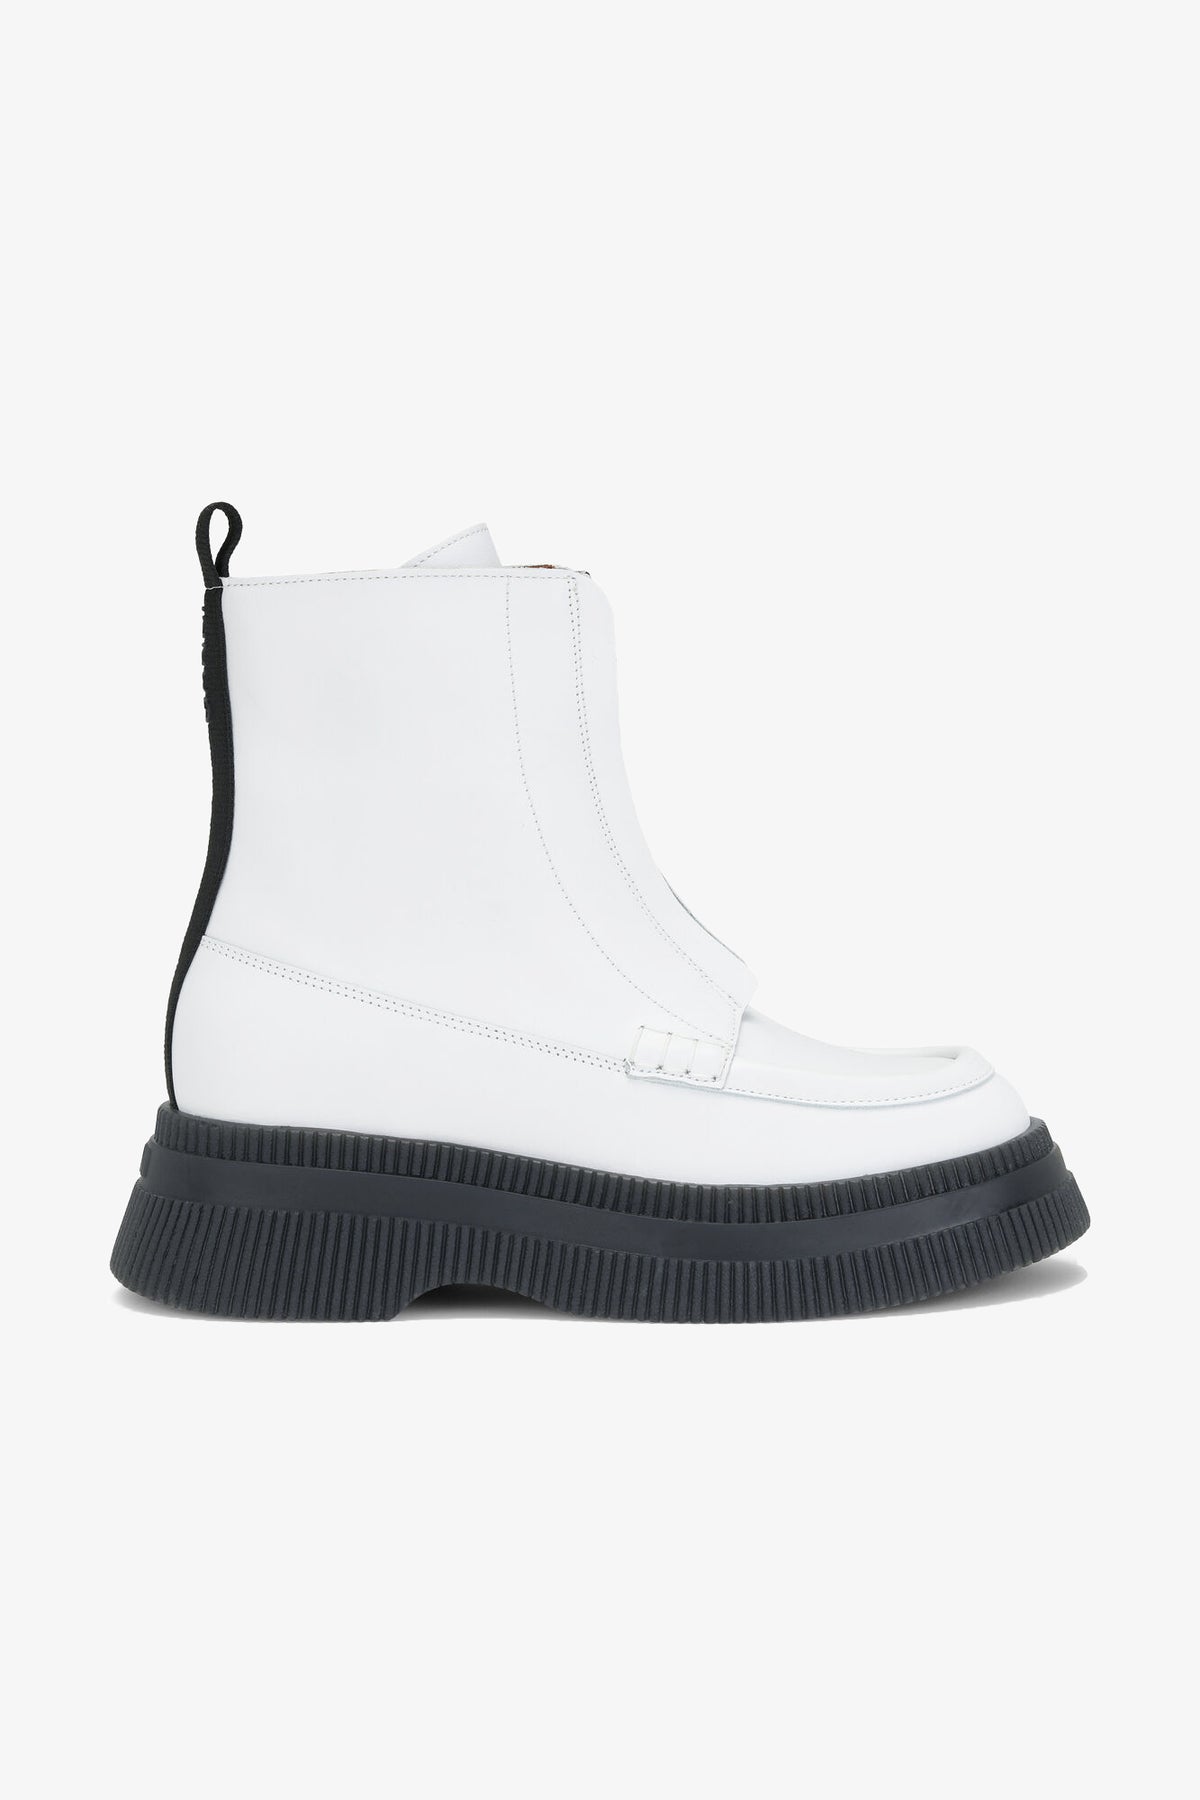 GANNI Creepers Wallaby Zip Boots